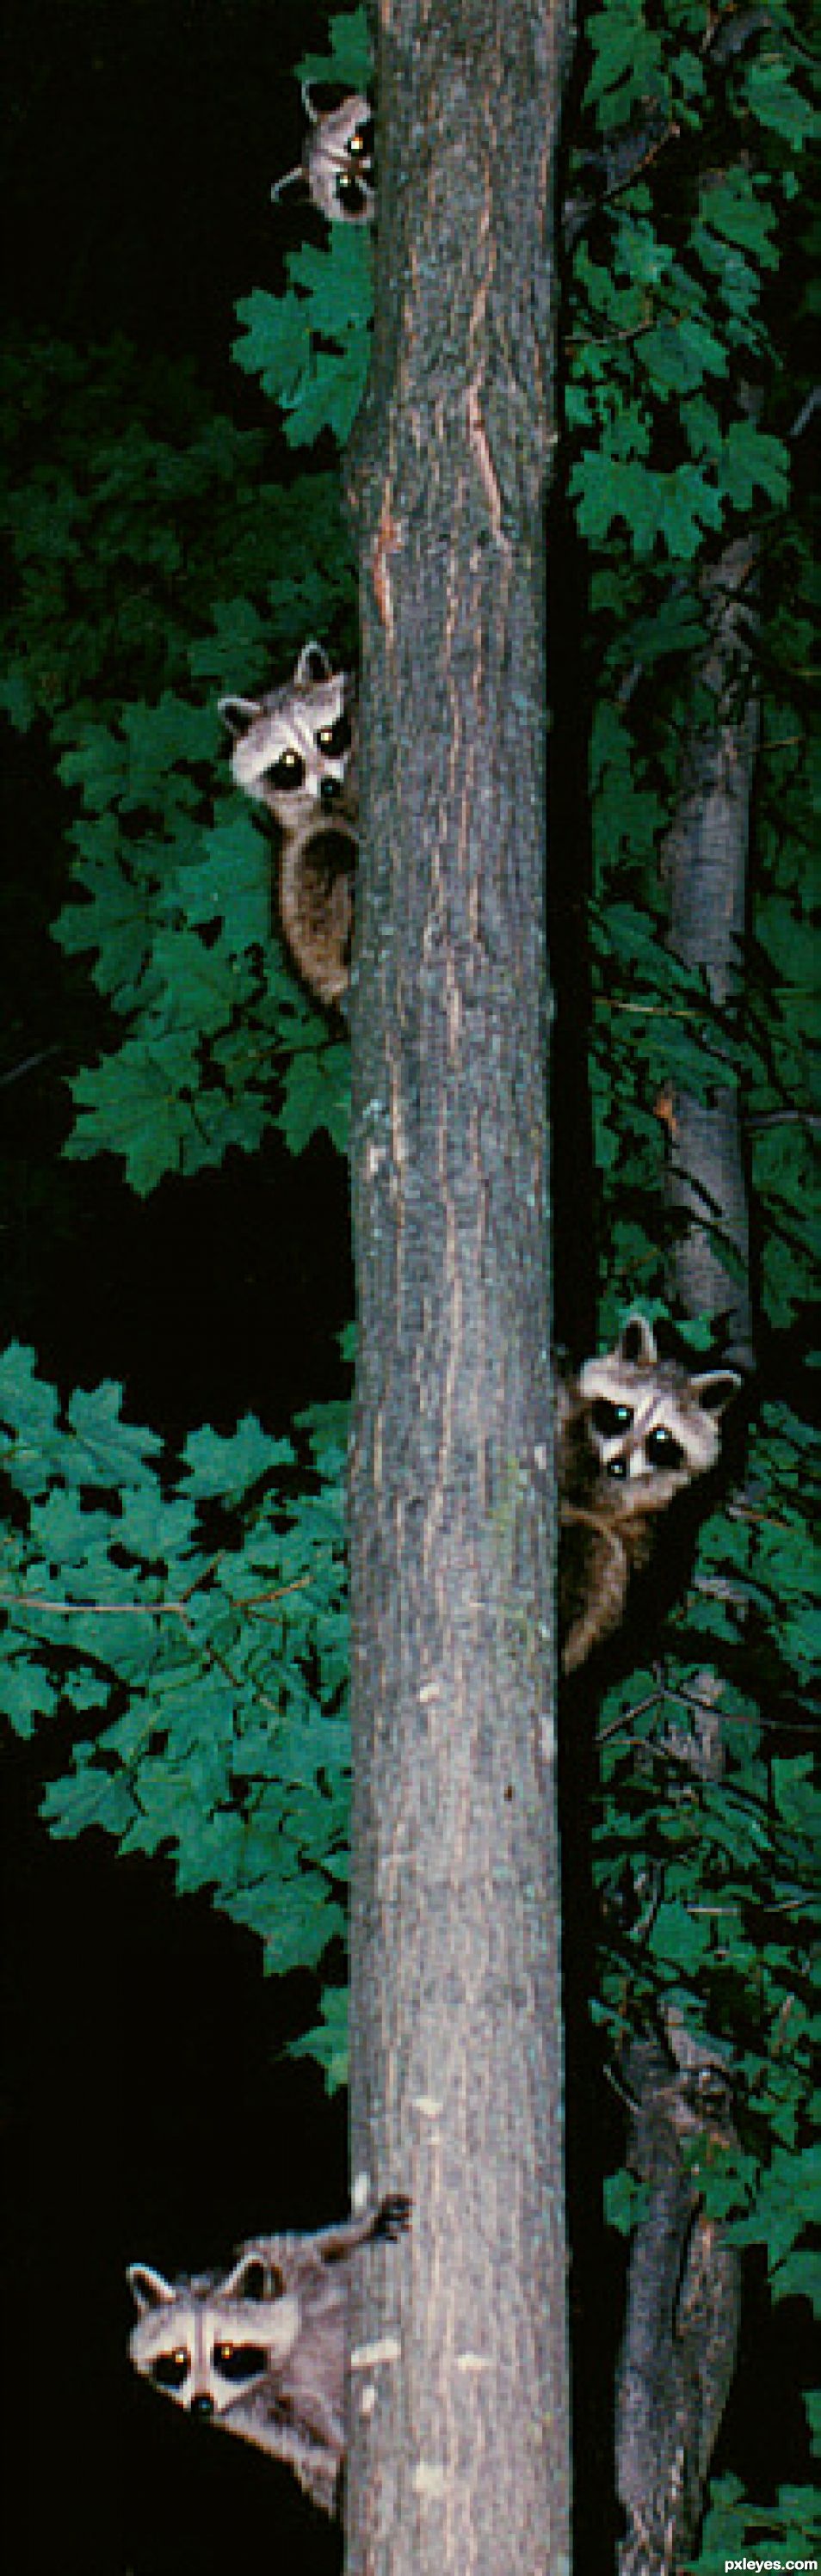 Racoon Totem Pole